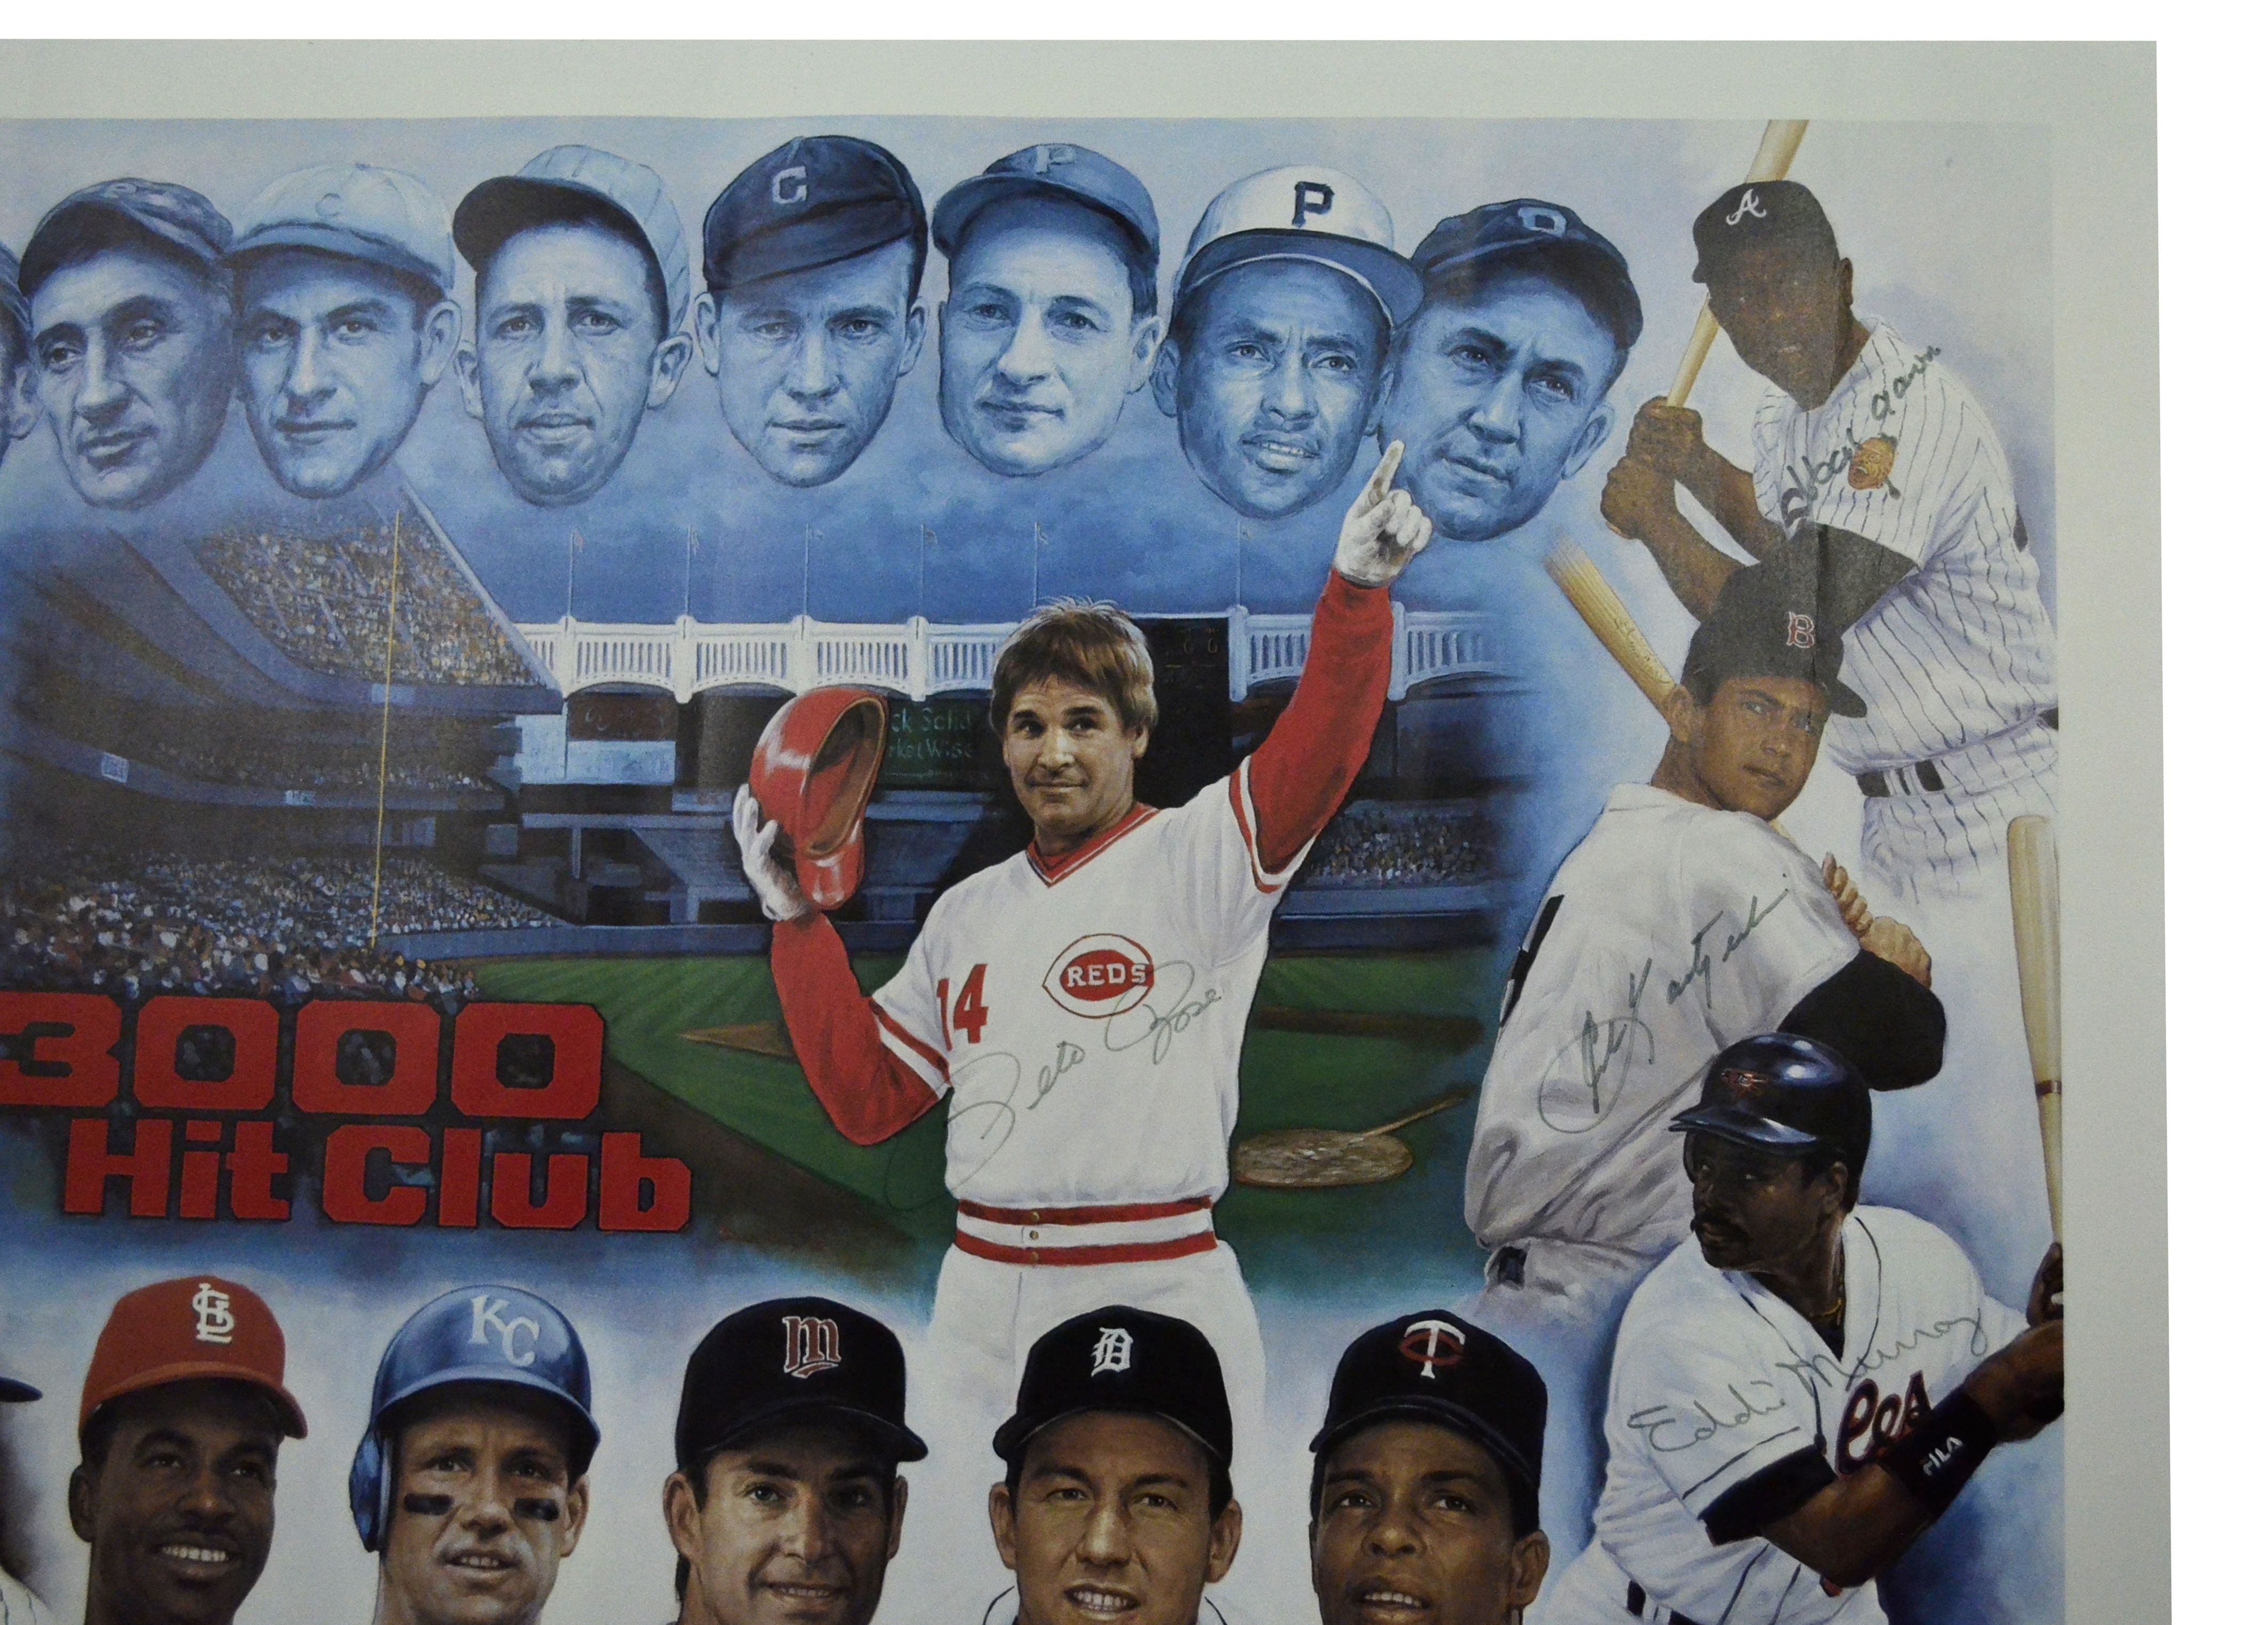 Lot Detail - 3000 Hit Club Poster with 13 Signatures Including Aaron Mays and Yastrzemski4246 x 3042